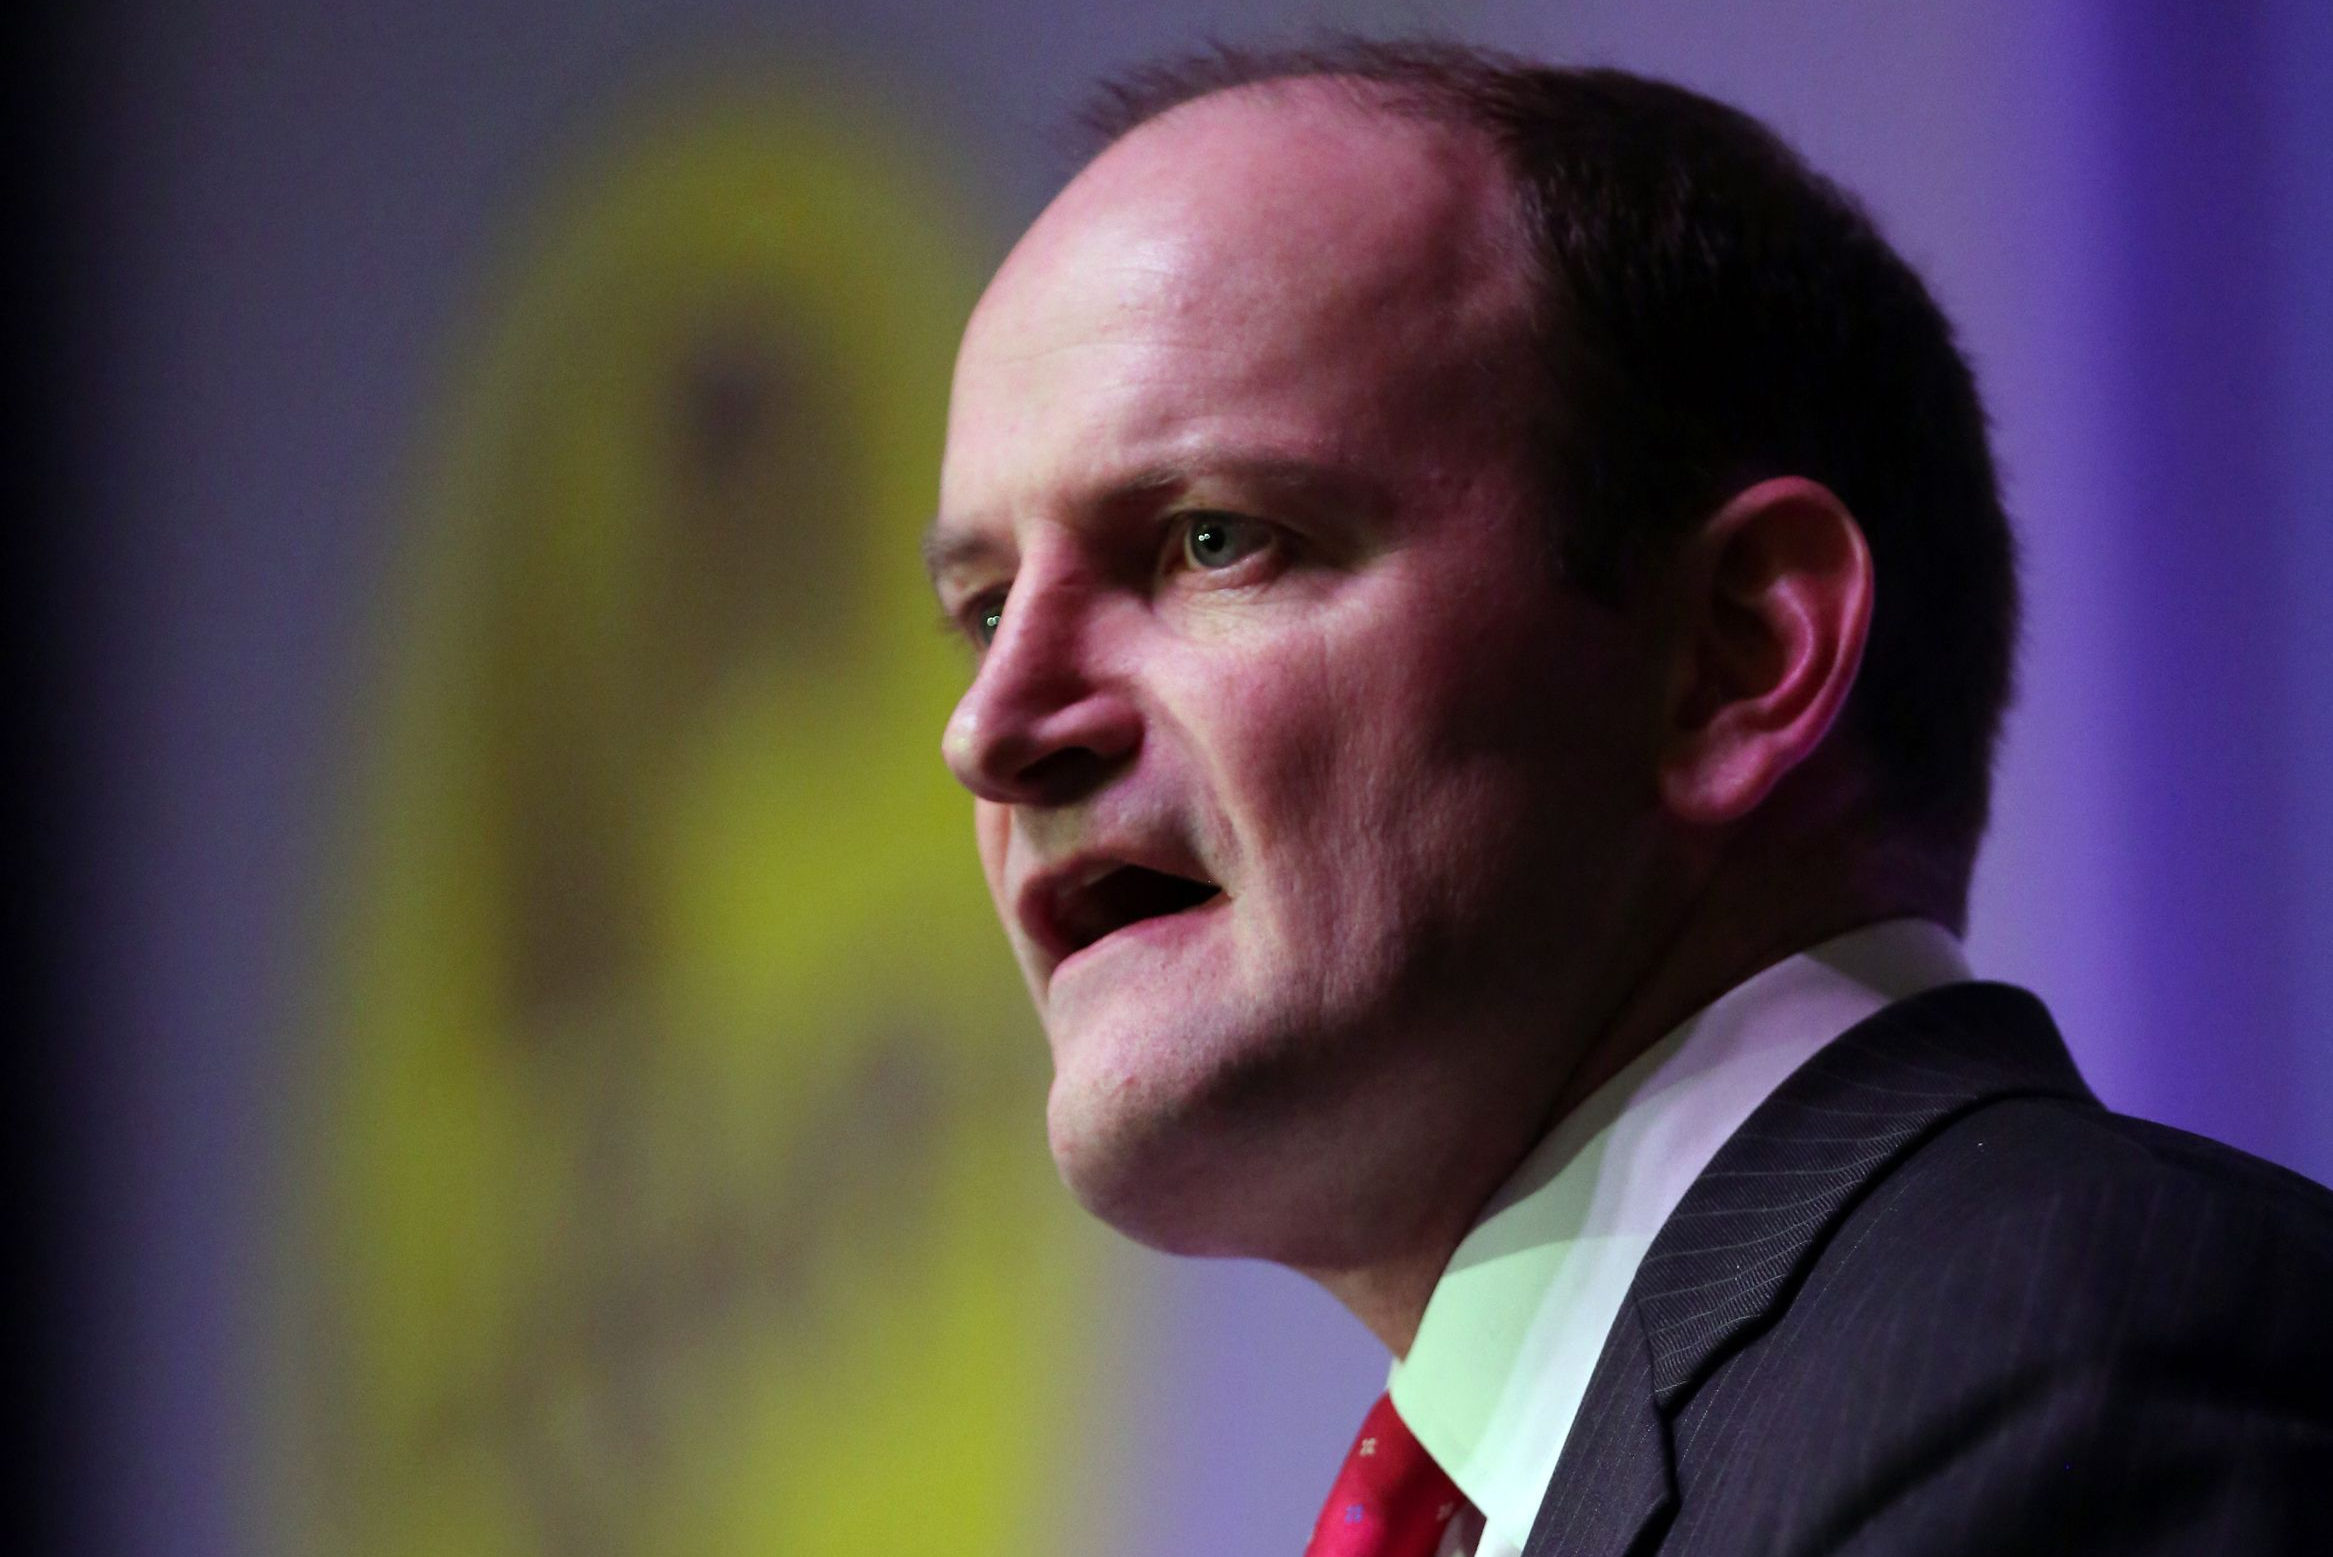 Ukip's only MP Douglas Carswell was described as 'borderline autistic with mental illness wrapped in' by Arron Banks